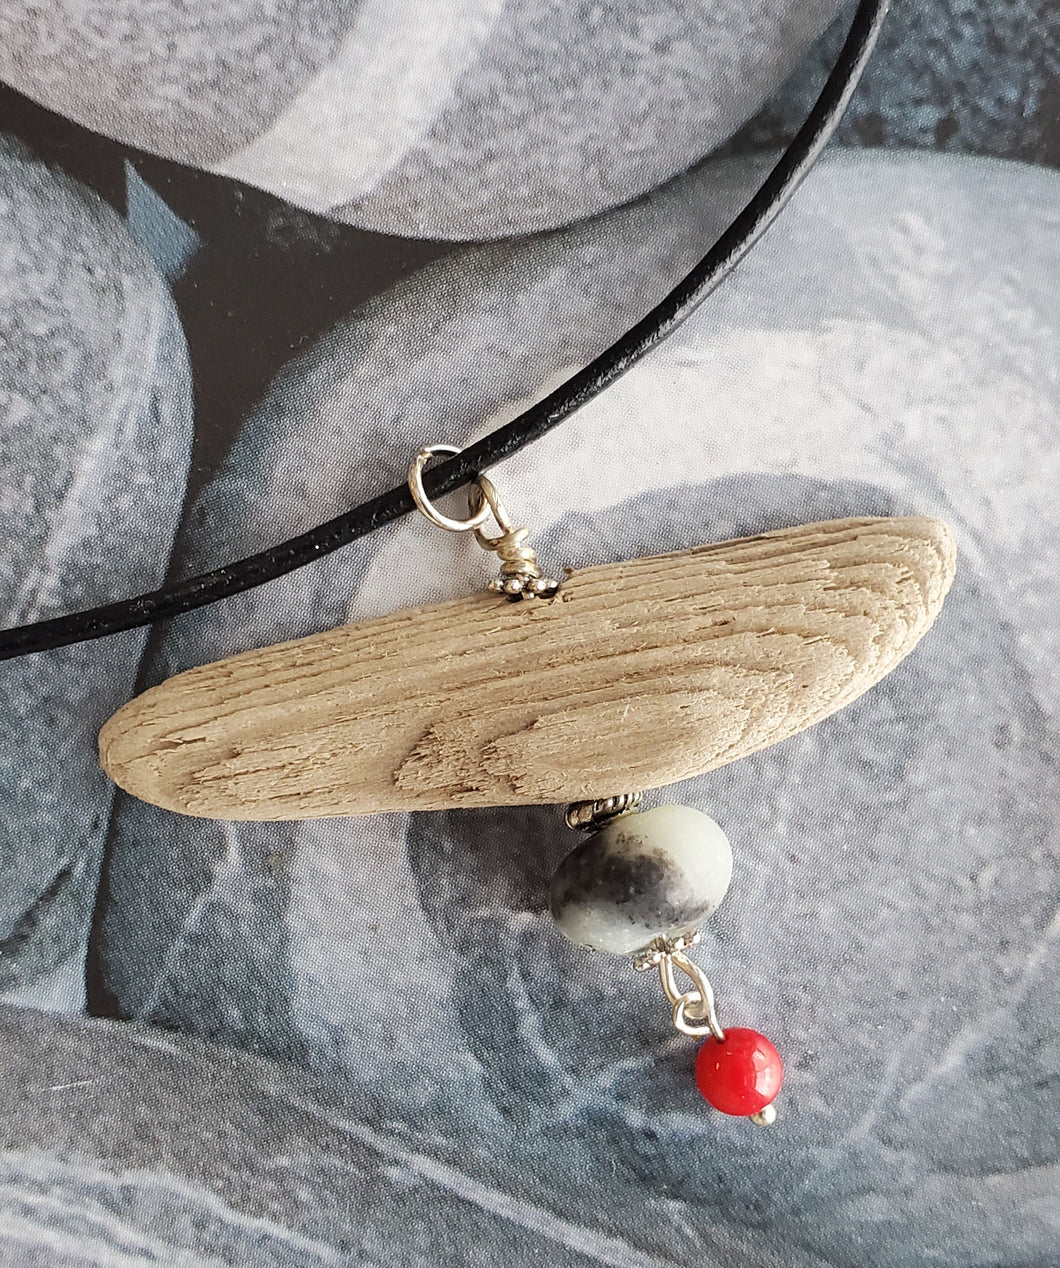 Black & White Amazonite with red coral on black leather necklace 22